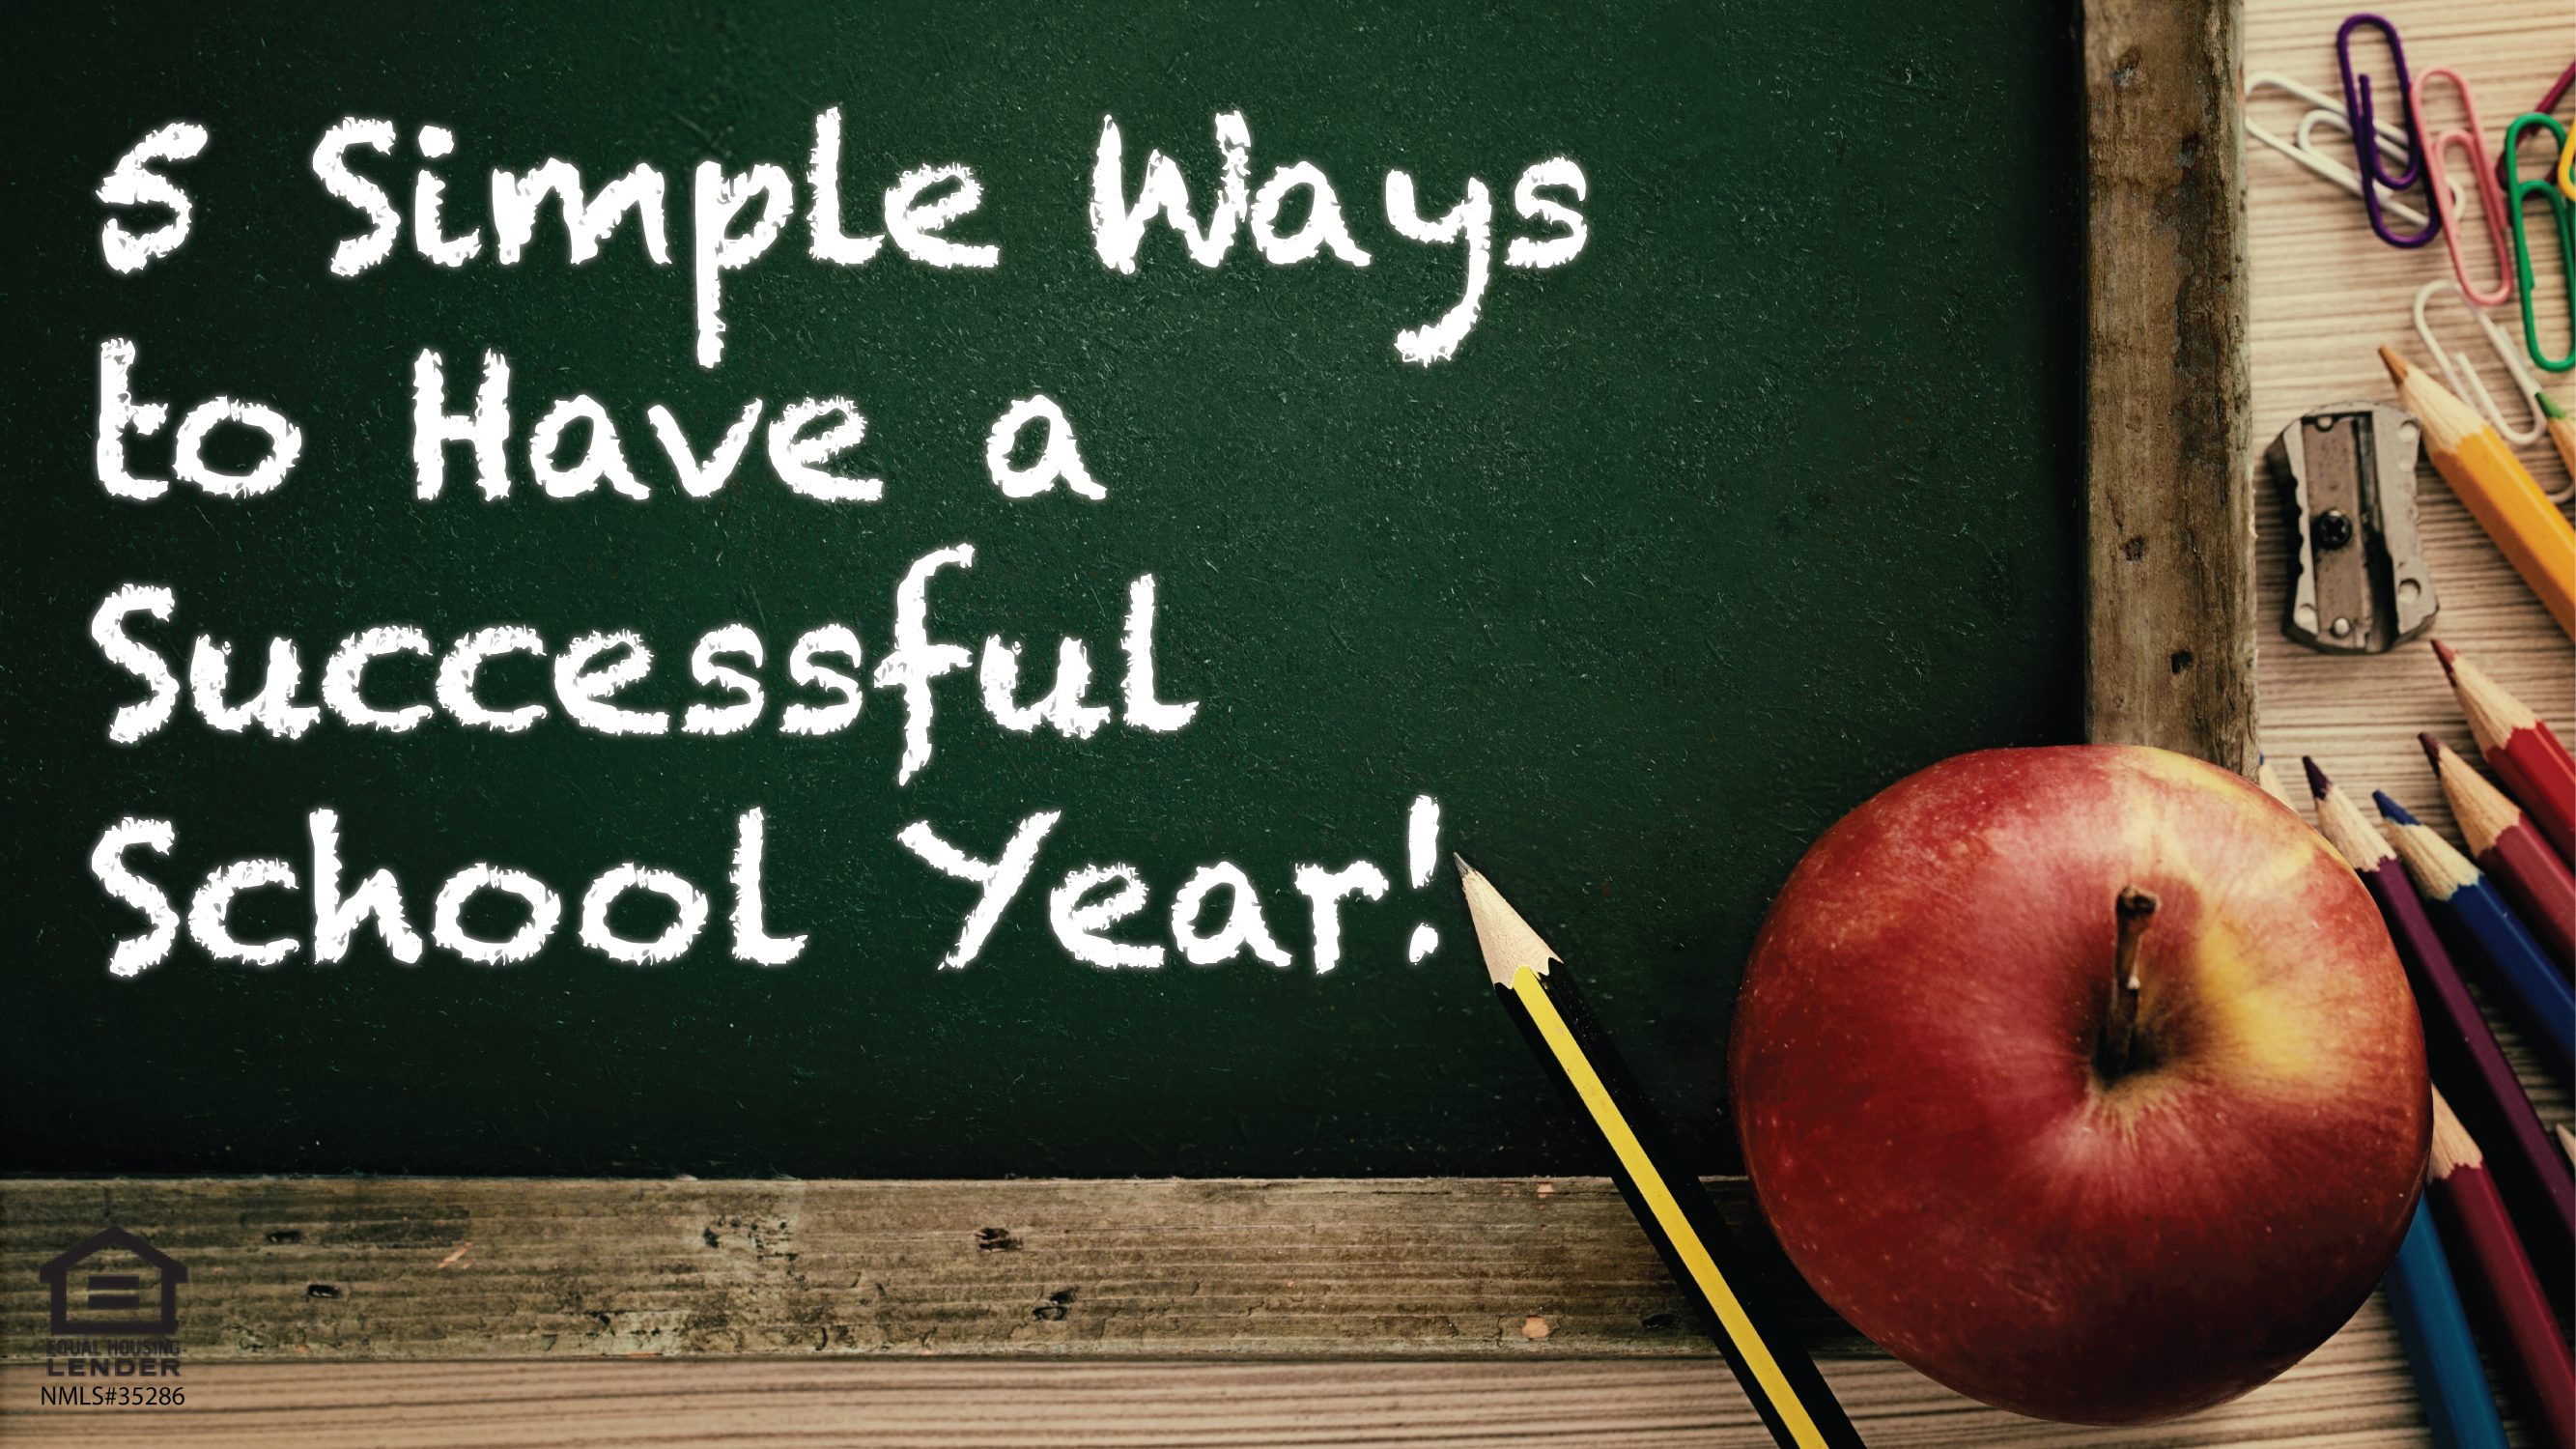 5 Simple Ways to Have a Successful School Year